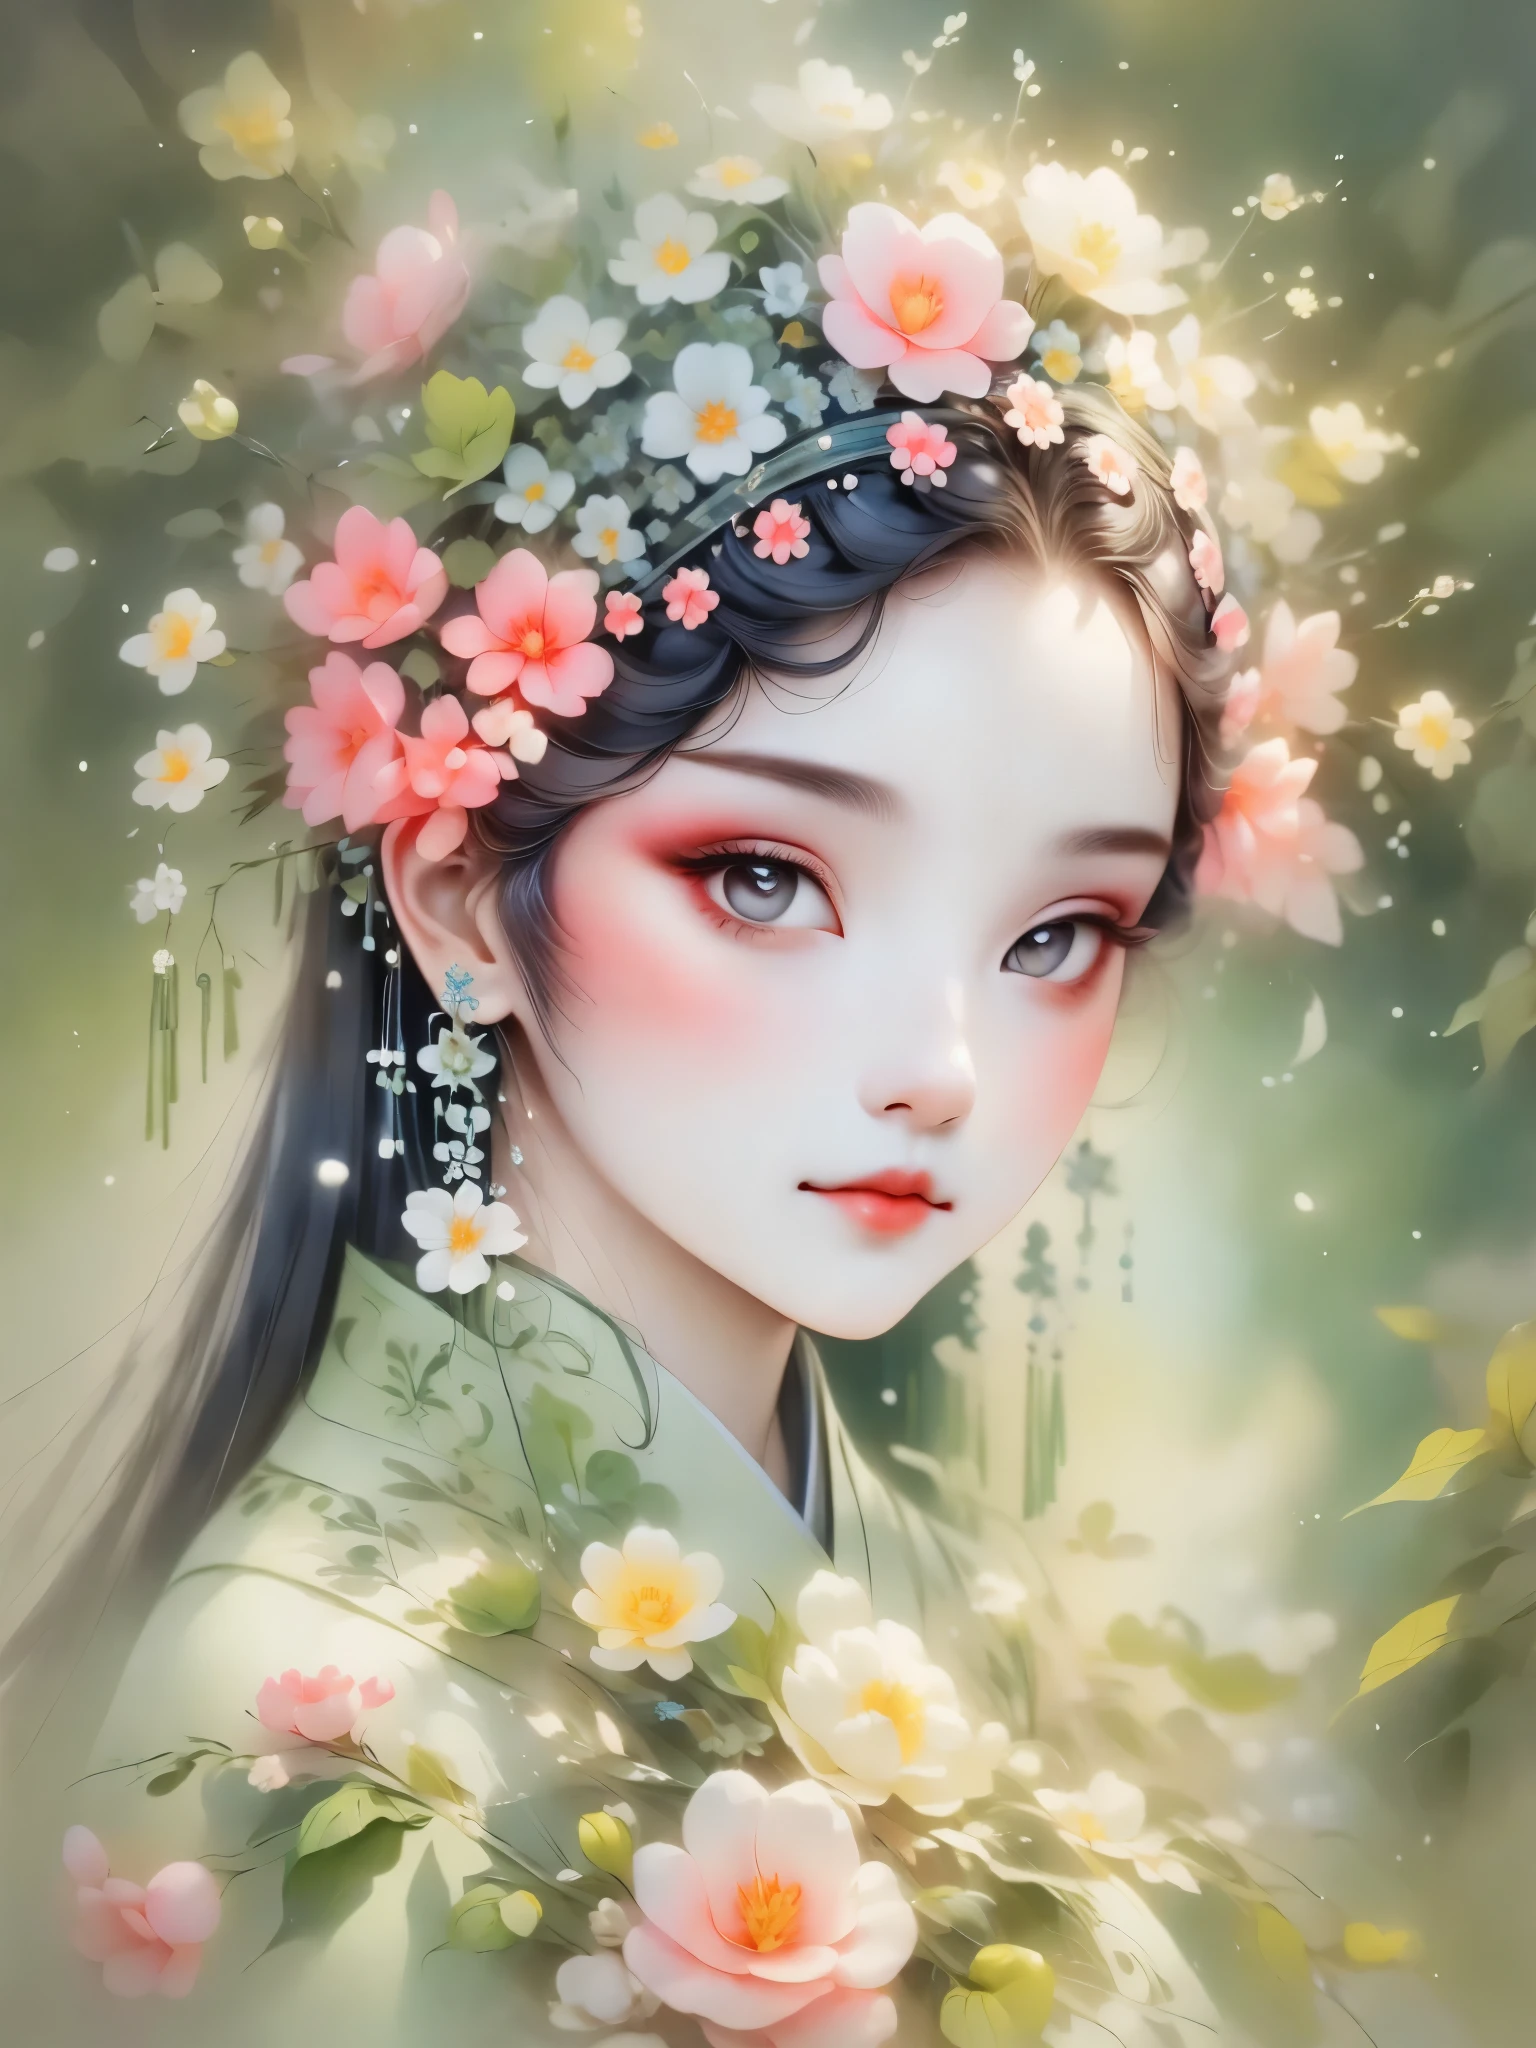 （detailed，high quality），1 girl，beautiful portrait，a garden scene，Art with coloring book page effect。The background should be completely white，and only the outline of the object should be visible。Artwork should have a line art style，similar to a coloring book。It should have a mandala with natural decoration。The overall artwork should have a clean line art style，Similar to color book pages。Inspired by the brushstrokes of Alphonse Mucha，back to back，Decorate with new artistic styles。Ensures perfect detail and realistic appearance。The subject of the artwork should be gray hair，The hair is just outlined，rather than filled。
